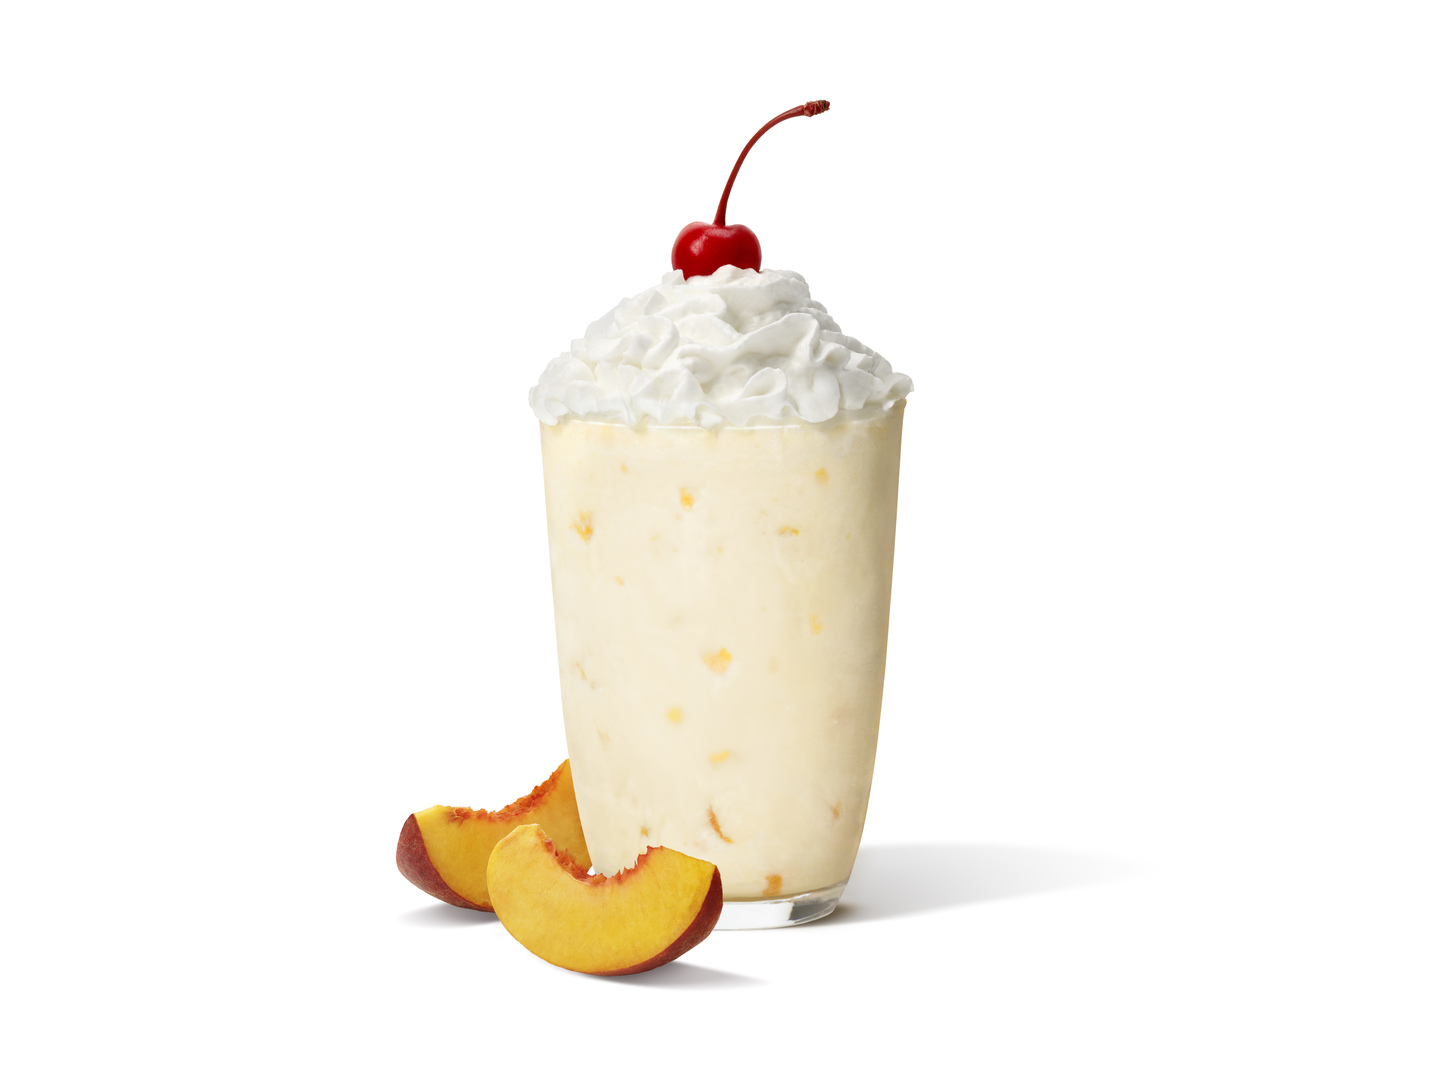 The iconic Chick-fil-A Peach Milkshake next to two slices of peaches on a plain white background.